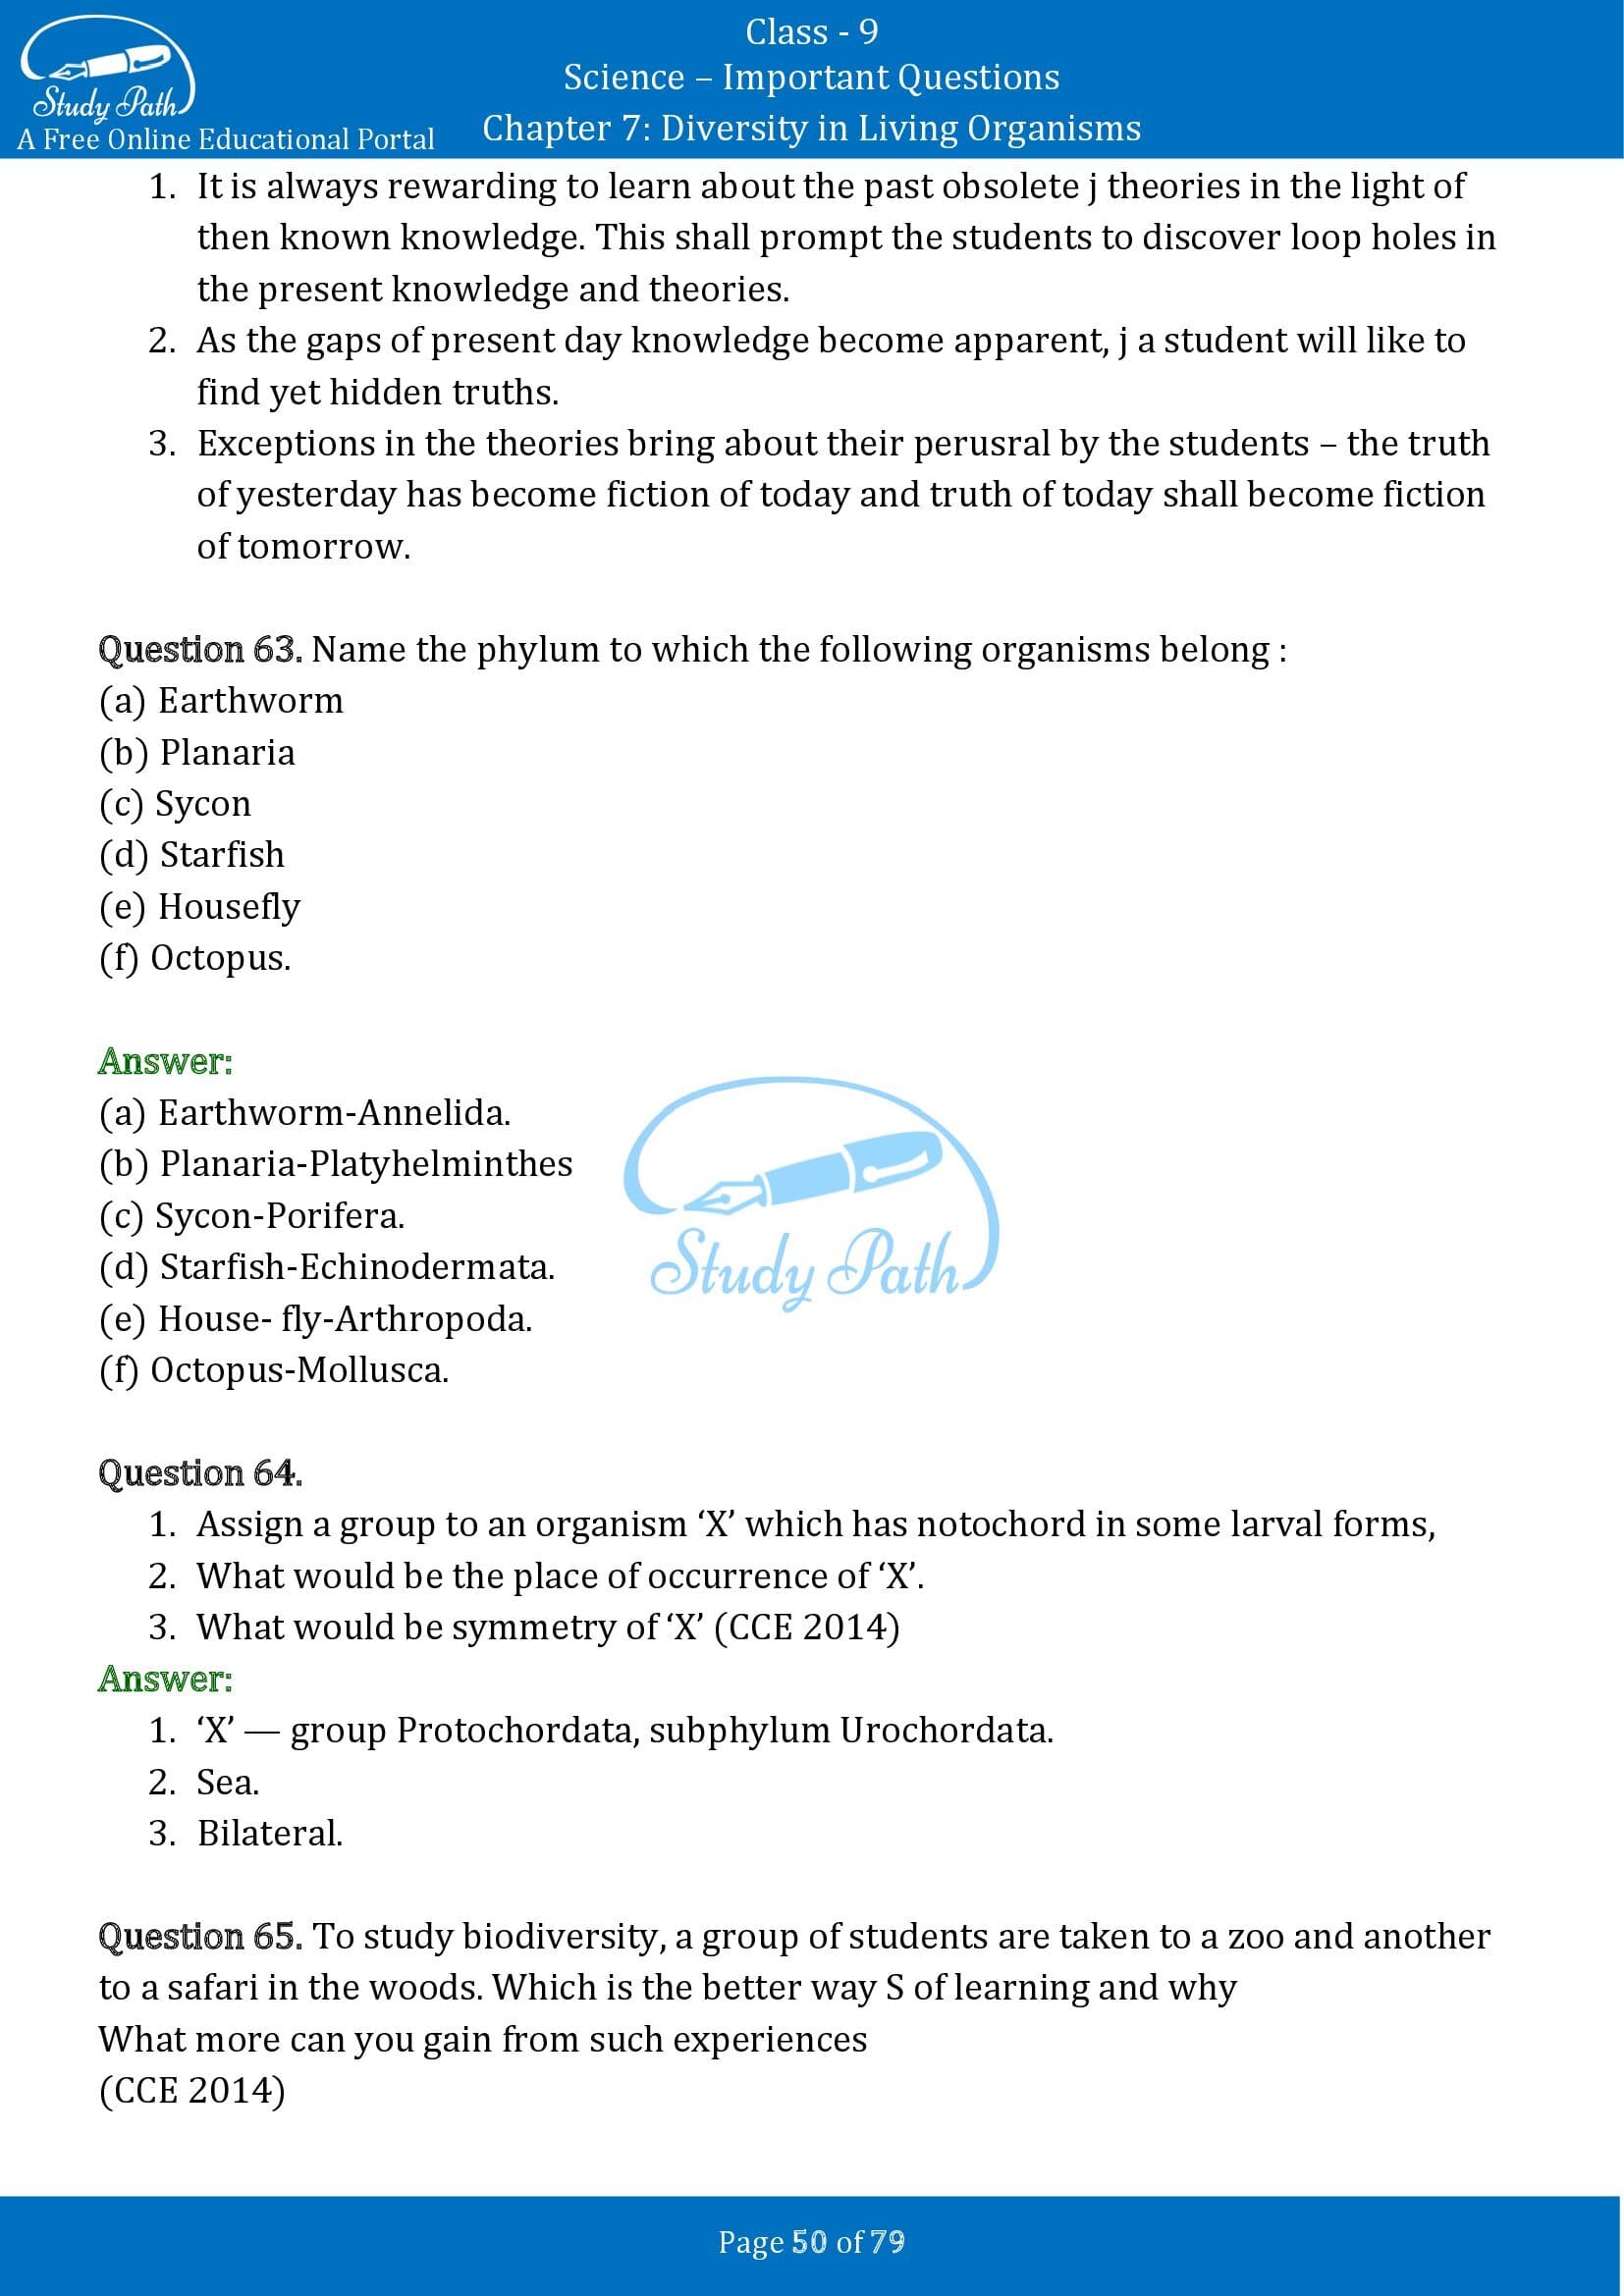 Important Questions for Class 9 Science Chapter 7 Diversity in Living Organisms 00050